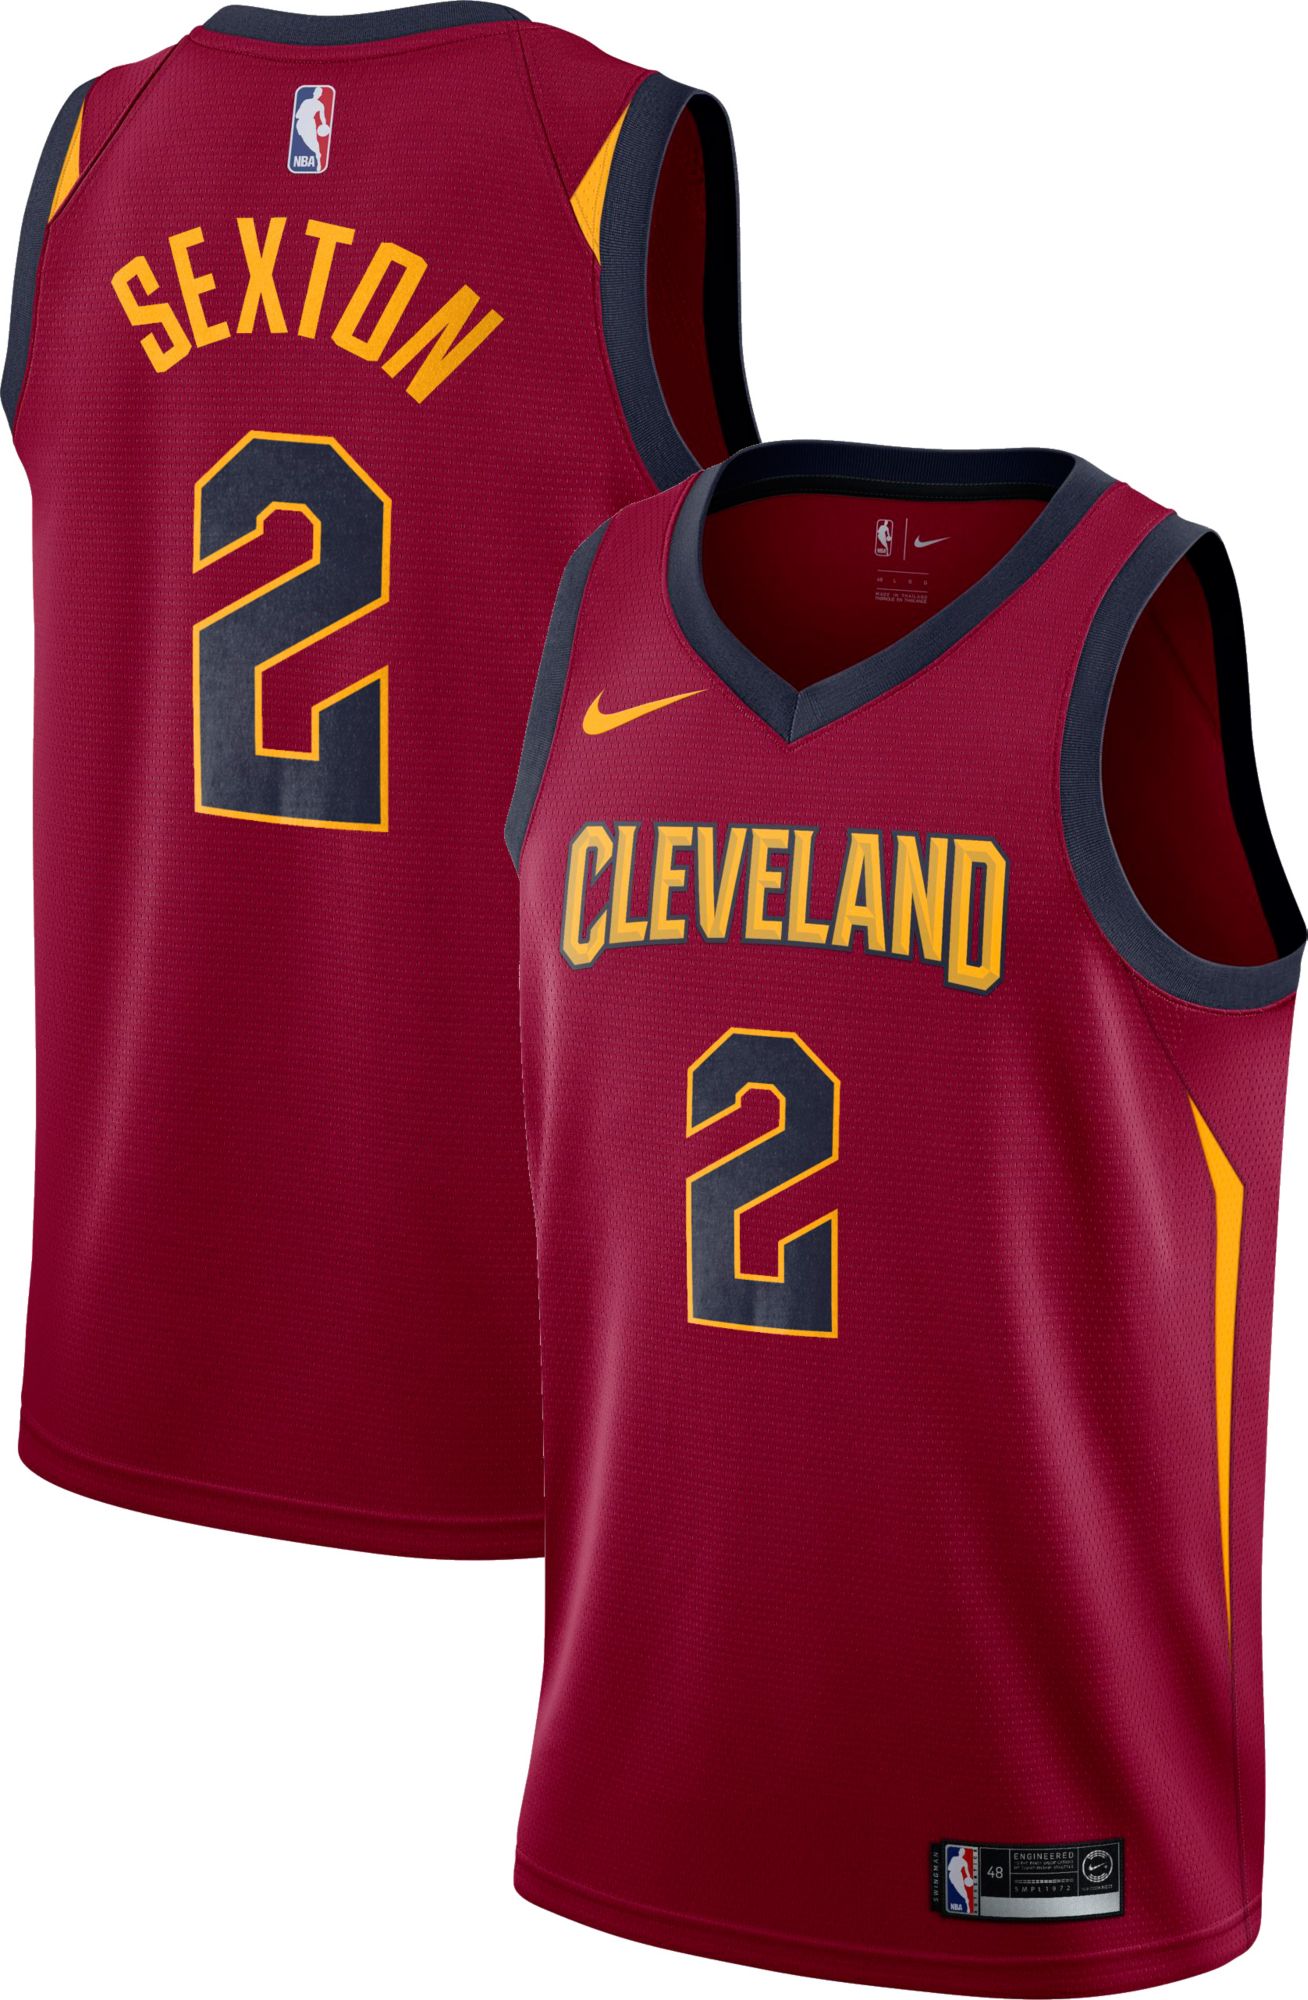 images of cleveland cavaliers jersey